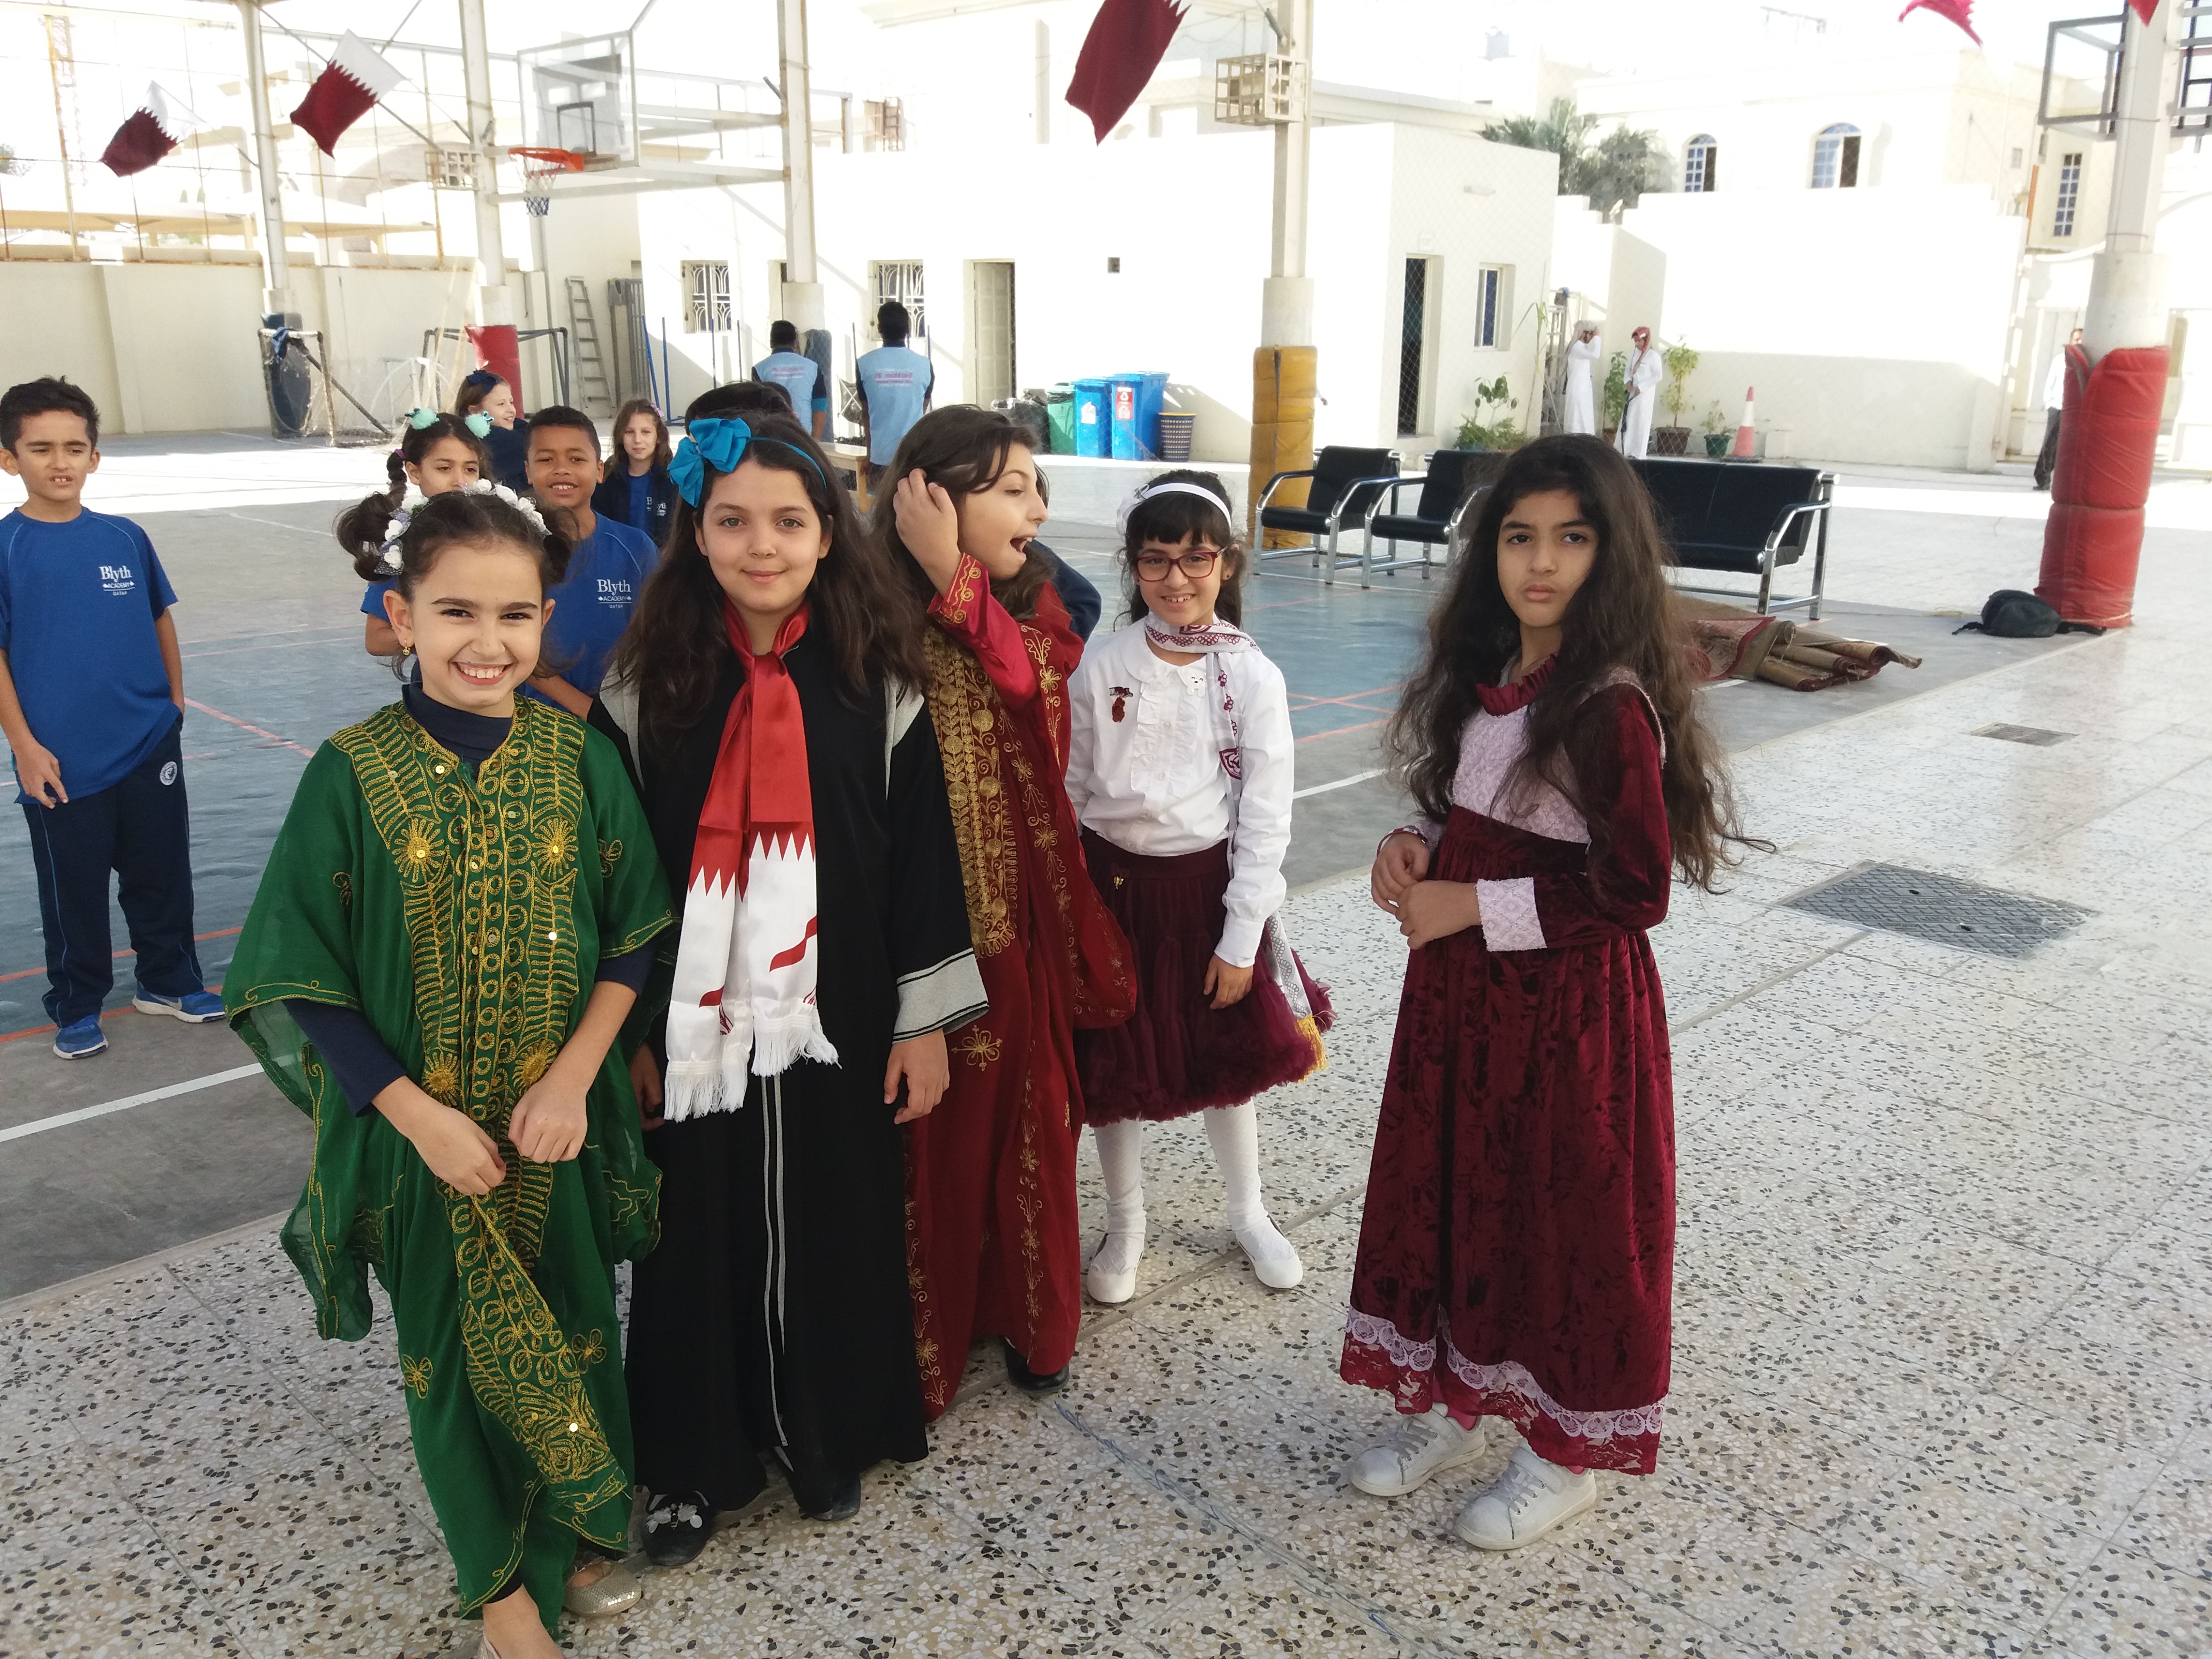 click to view the Qatar National Day photo gallery